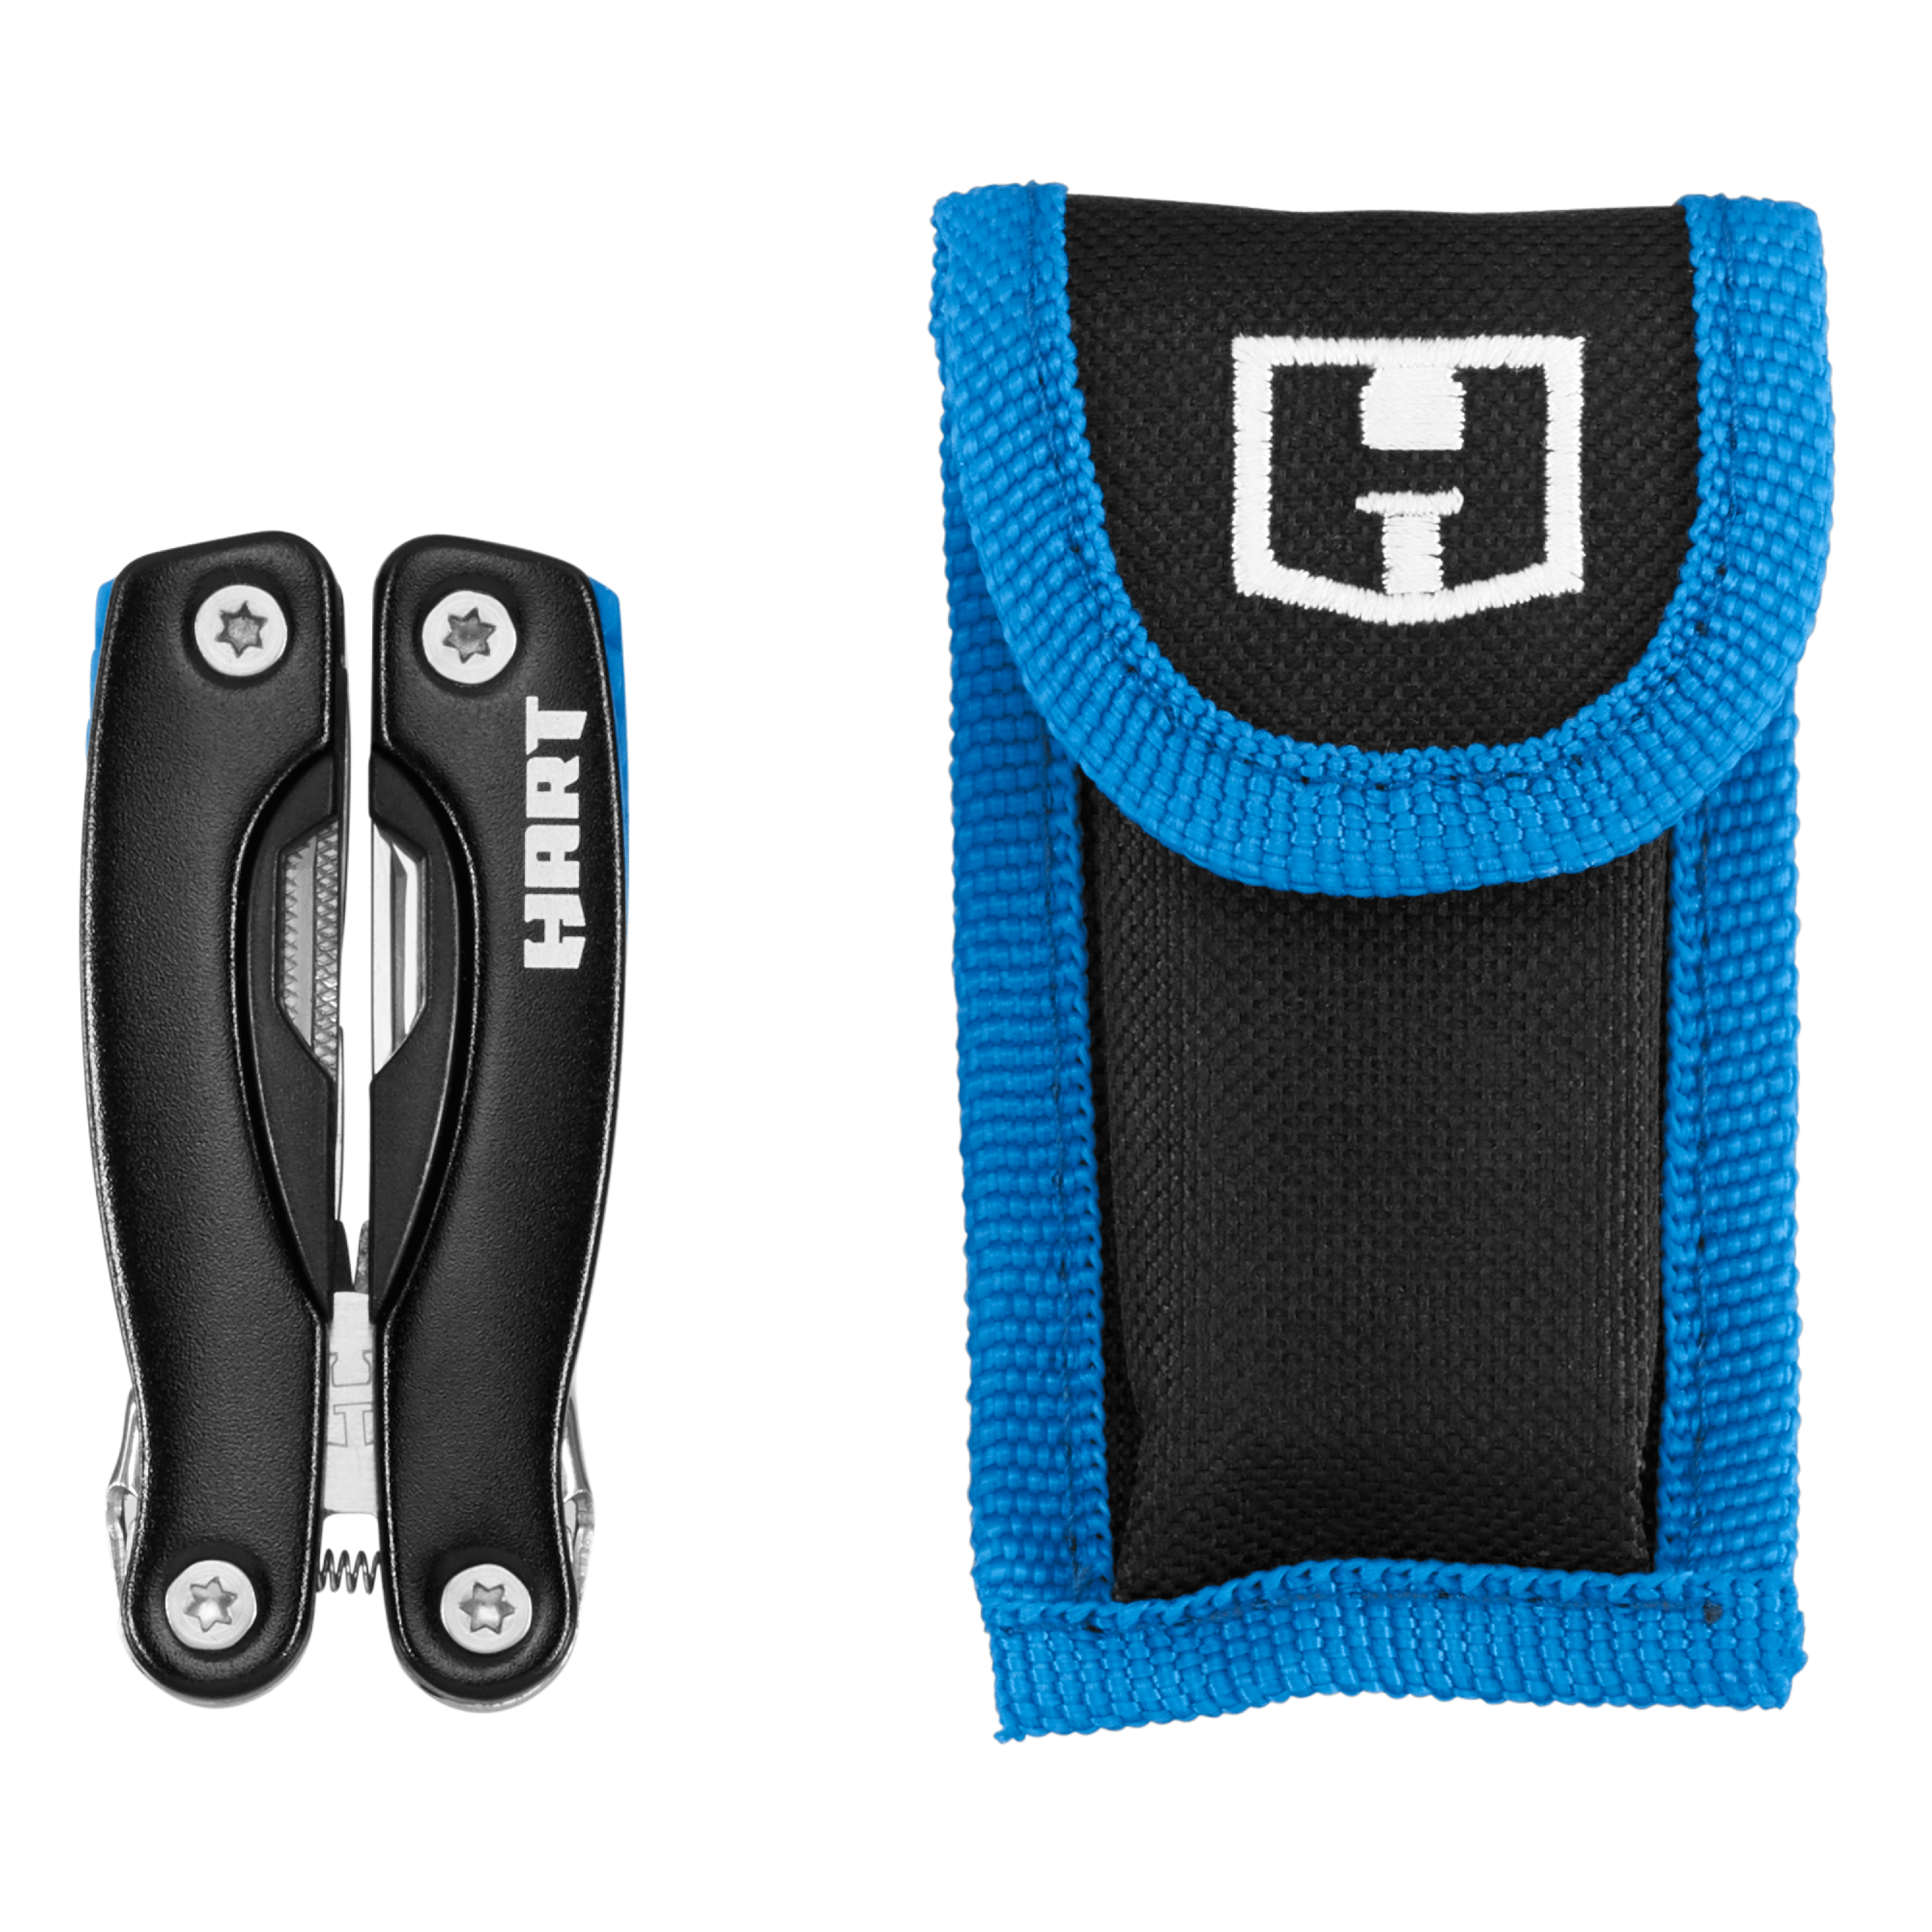 HART 14-in-1 Compact Multi-Tool with Storage Pouch - image 4 of 8